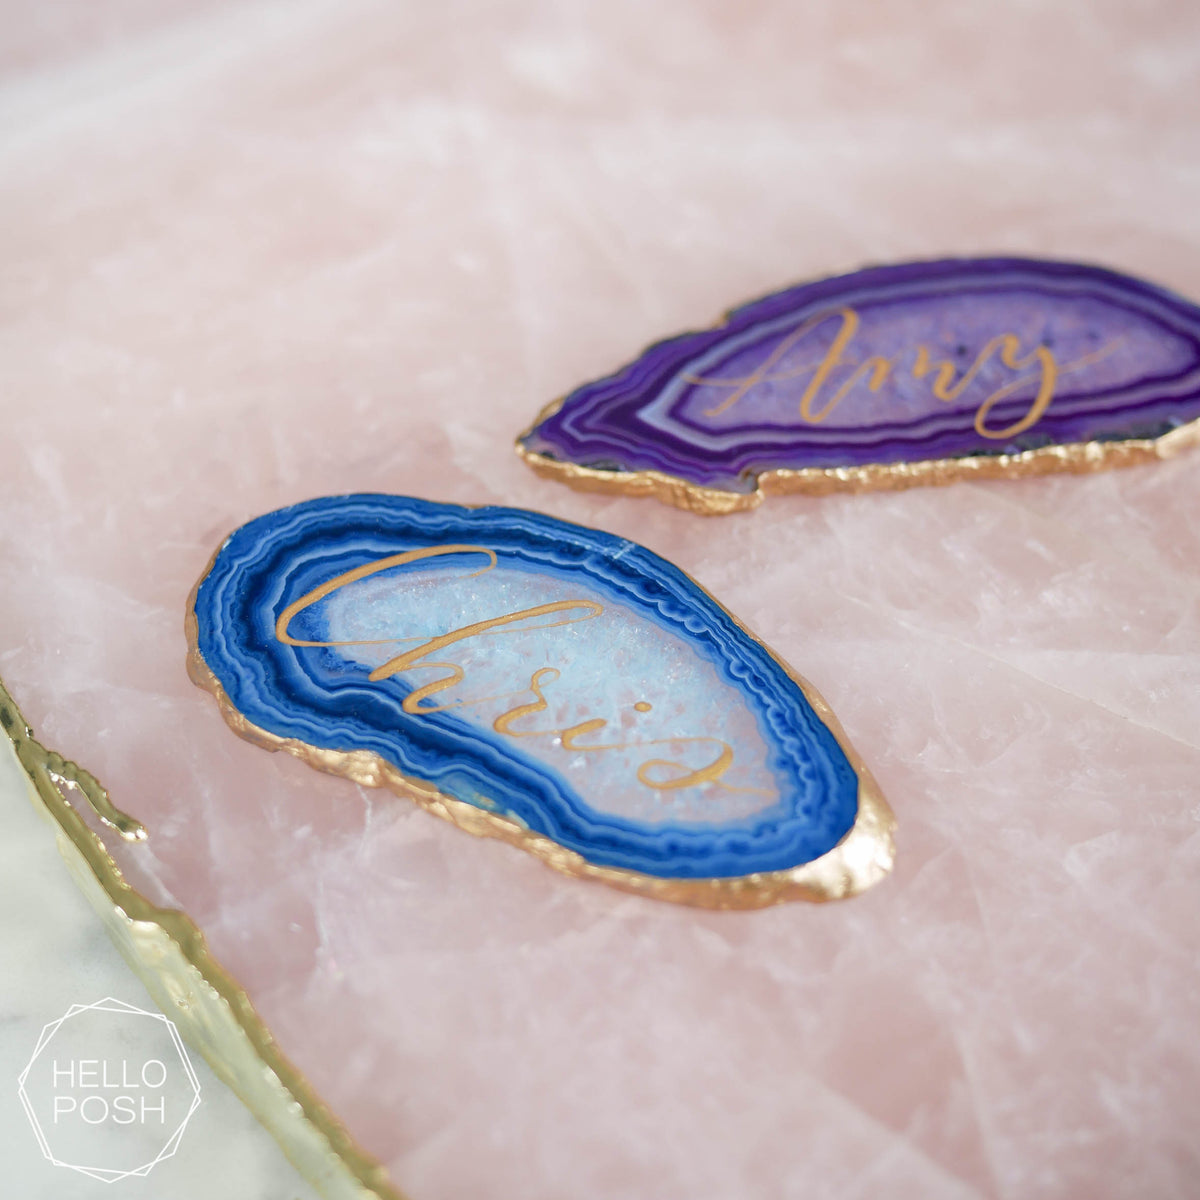 Gold gilded agate place cards